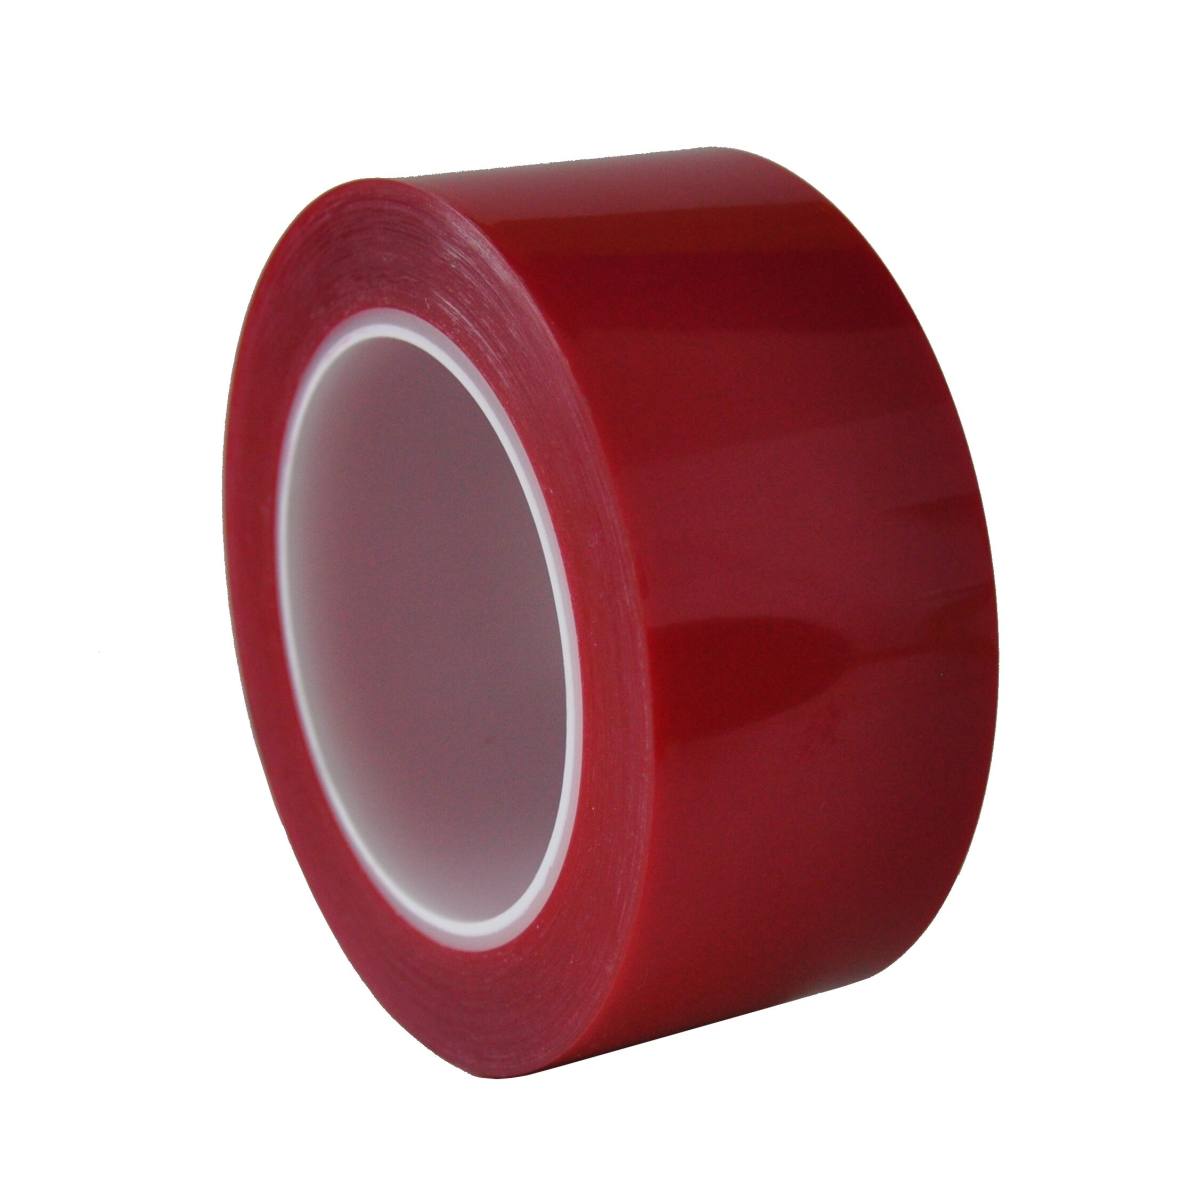 S-K-S 208R Polyester adhesive tape, 9mmx66m, red